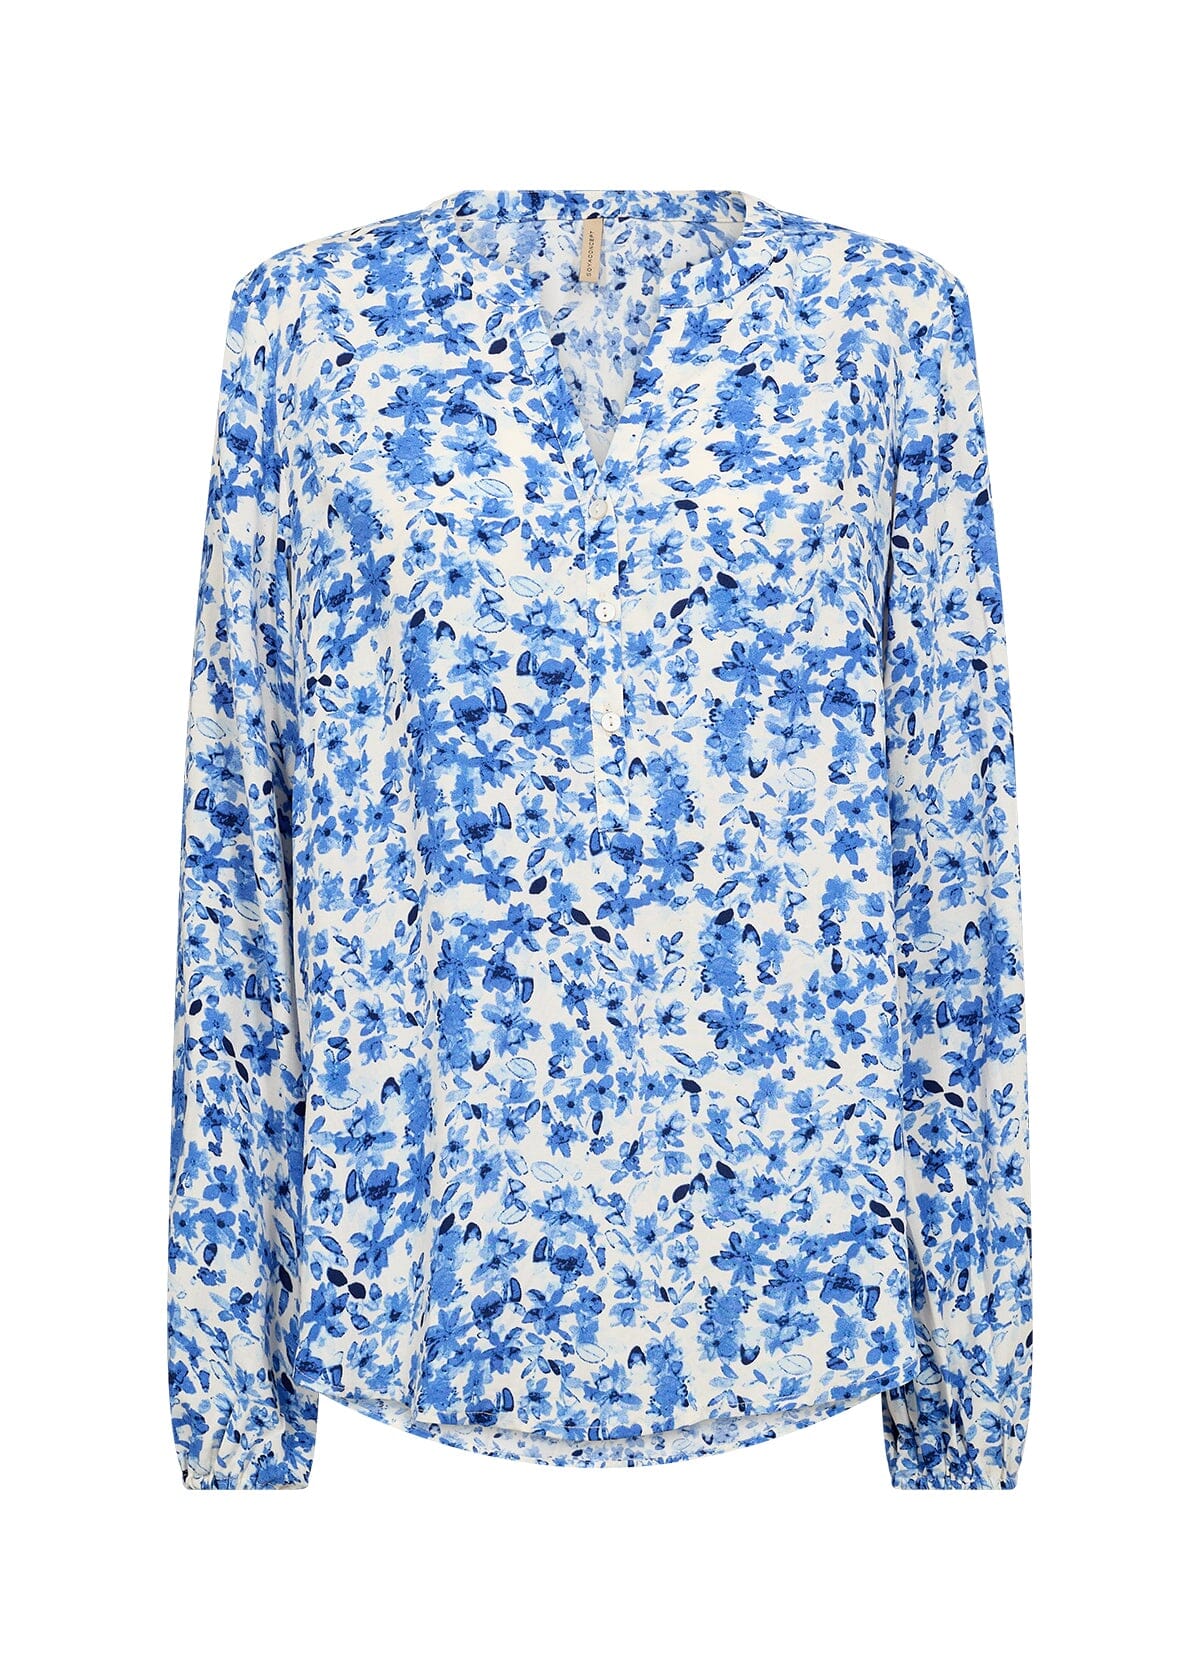 Doha Blouse in Crystal Blue Combi Blouse Soyaconcept 